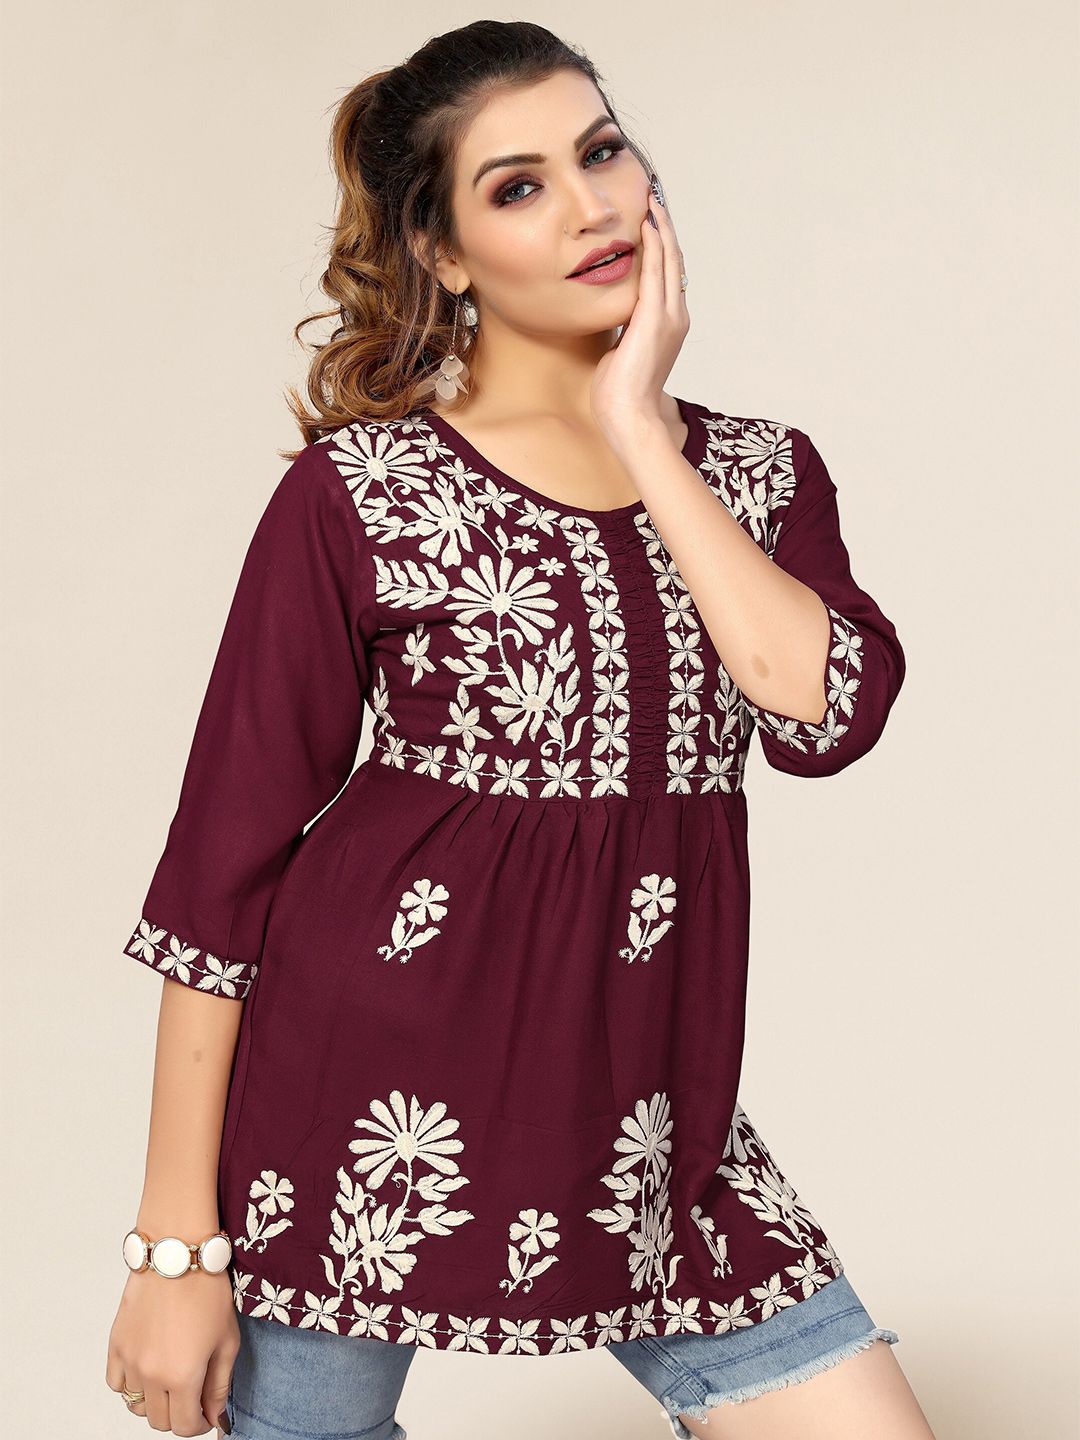 Winza Designer Women Maroon Floral Embroidered Top Price in India